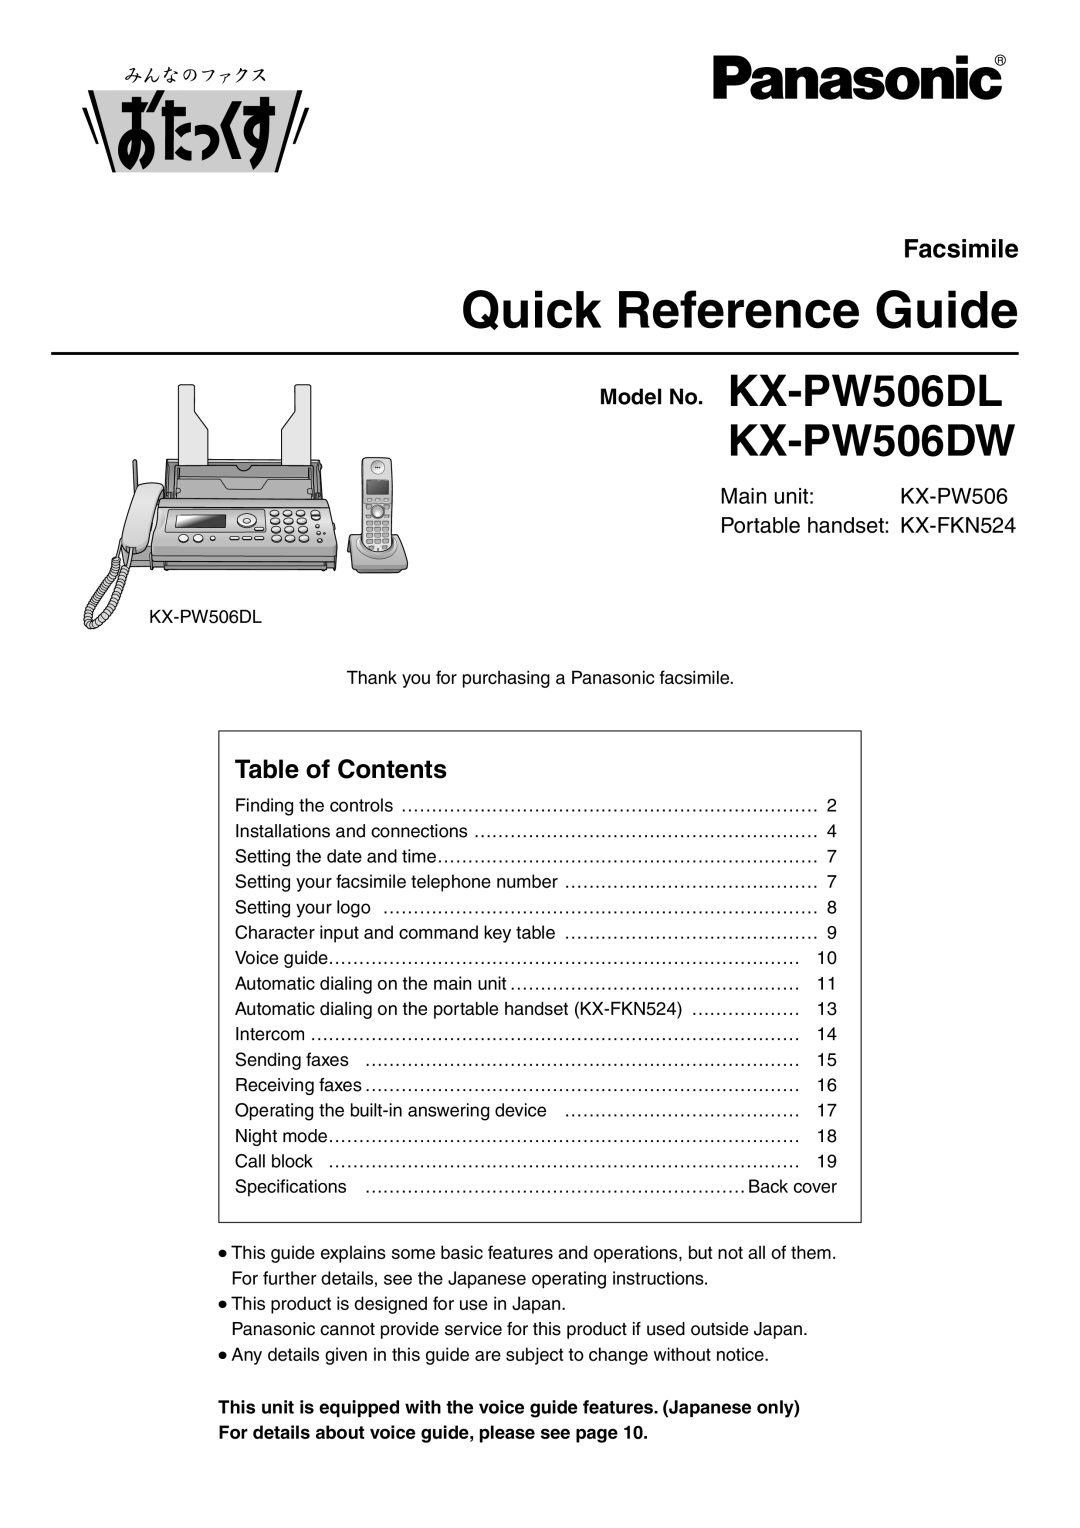 Panasonic KX-PW506DW manual Model No. KX-PW506DL, Quick Reference Guide, Facsimile, Table of Contents 